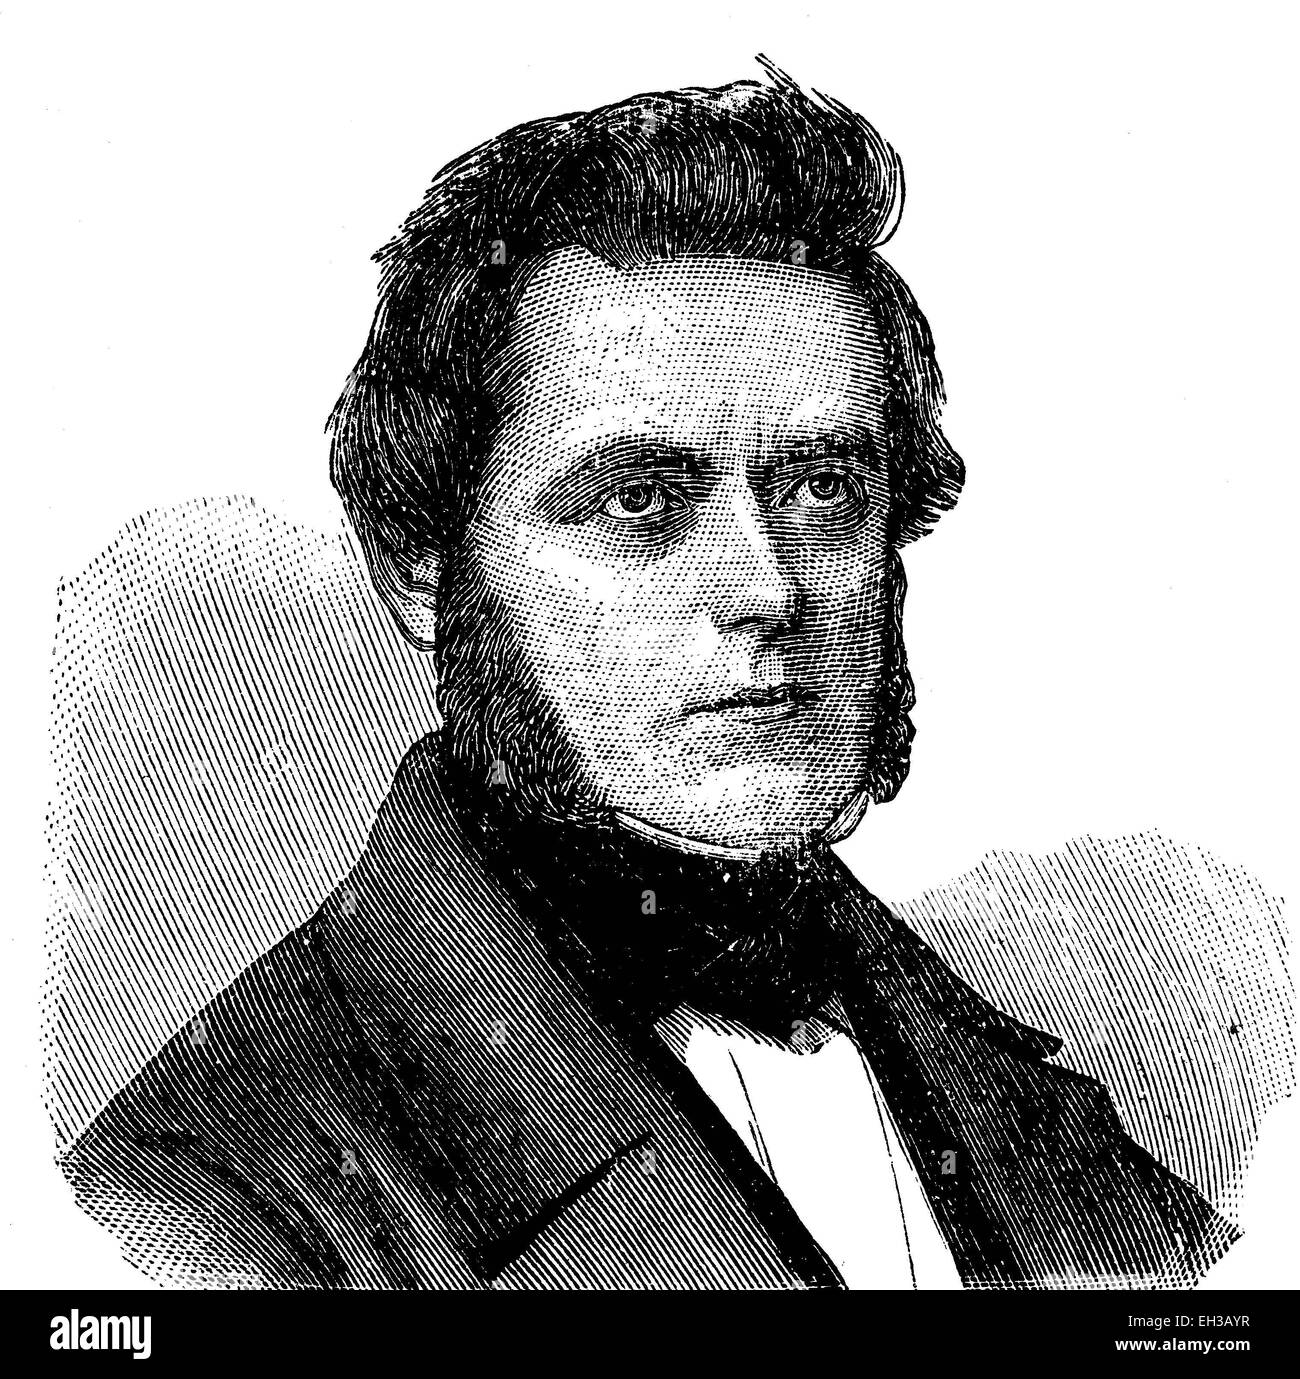 Robert Mohl, named von Mohl since 1837, 1799 - 1875, German political scientist, member of the Frankfurt Parliament in 1848 and member of the German Reichstag, wood engraving, 1880 Stock Photo